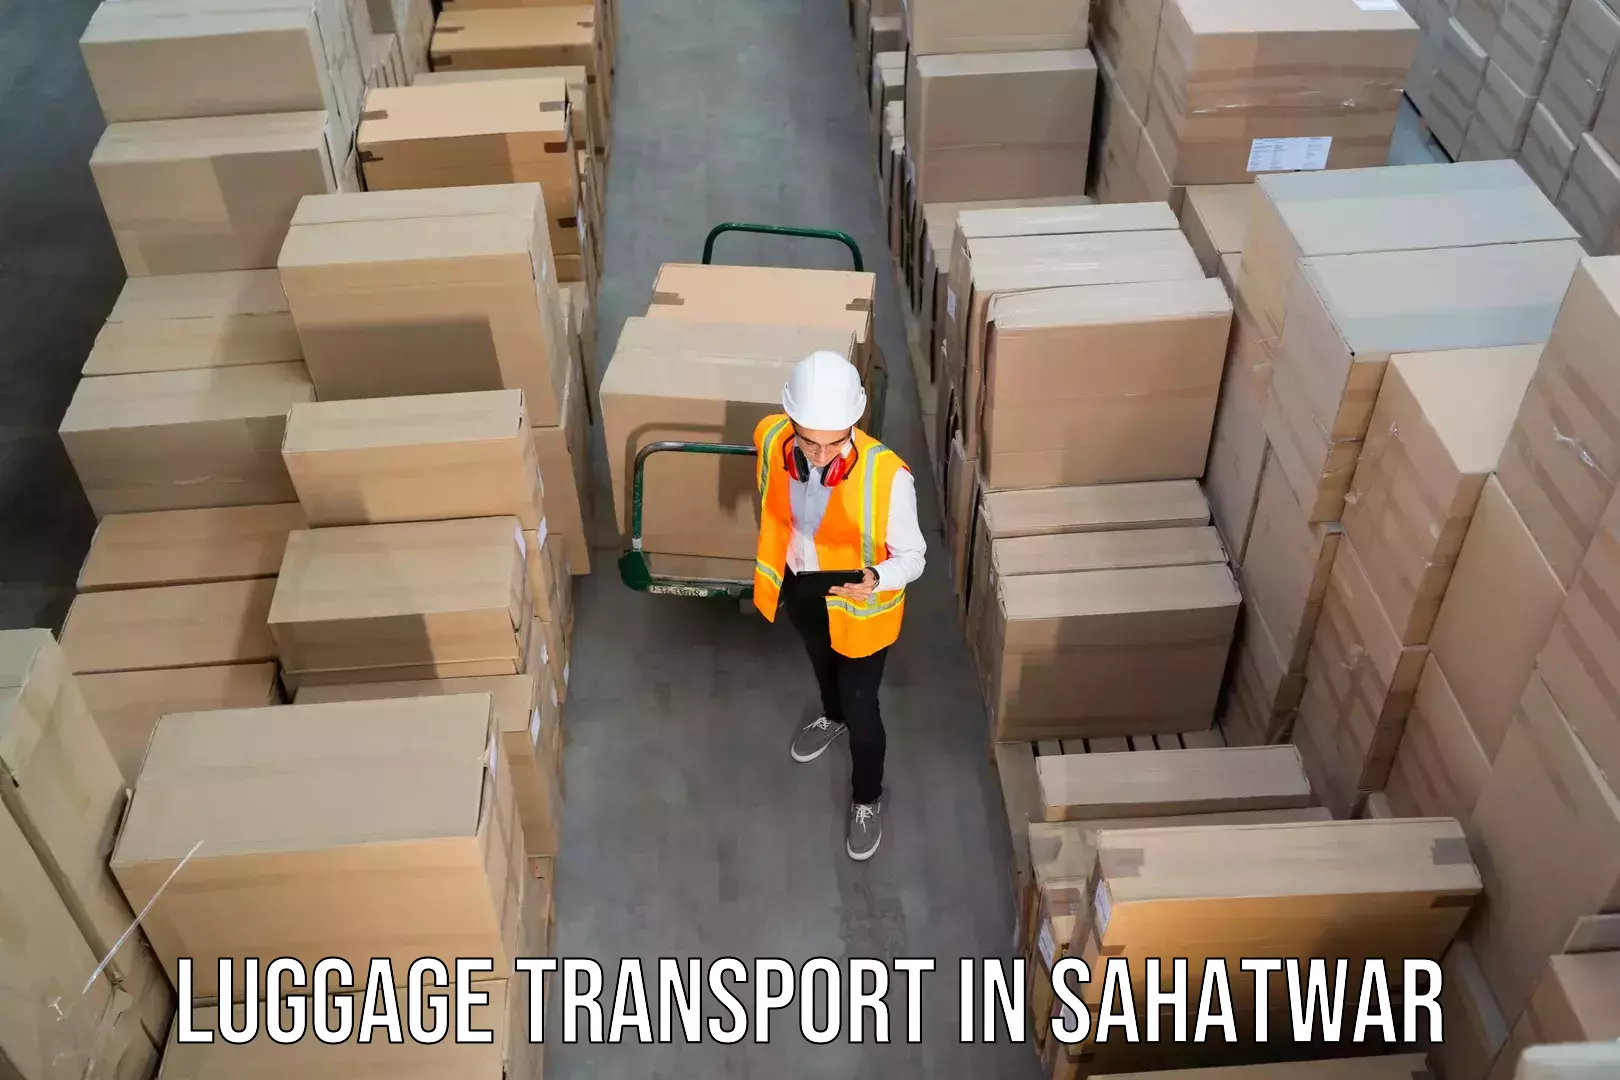 Luggage delivery operations in Sahatwar